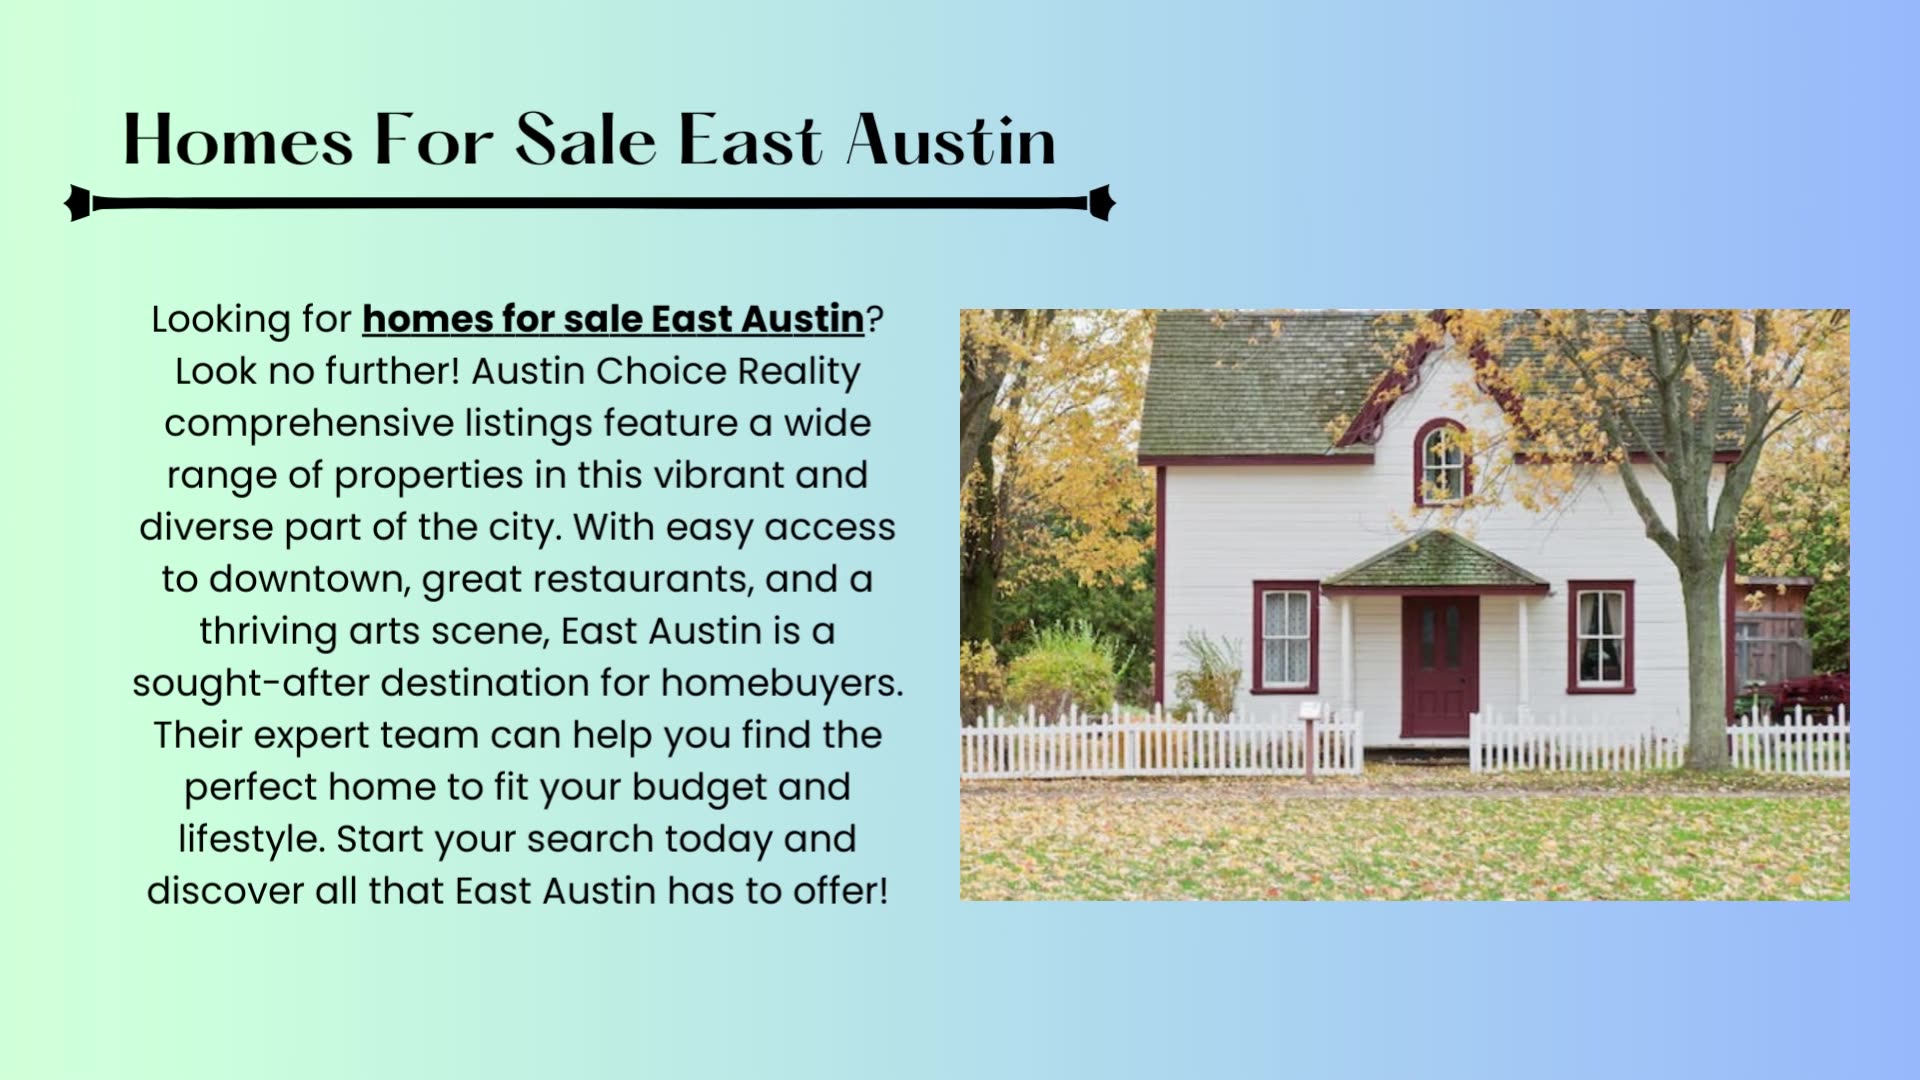 Homes For Sale East Austin